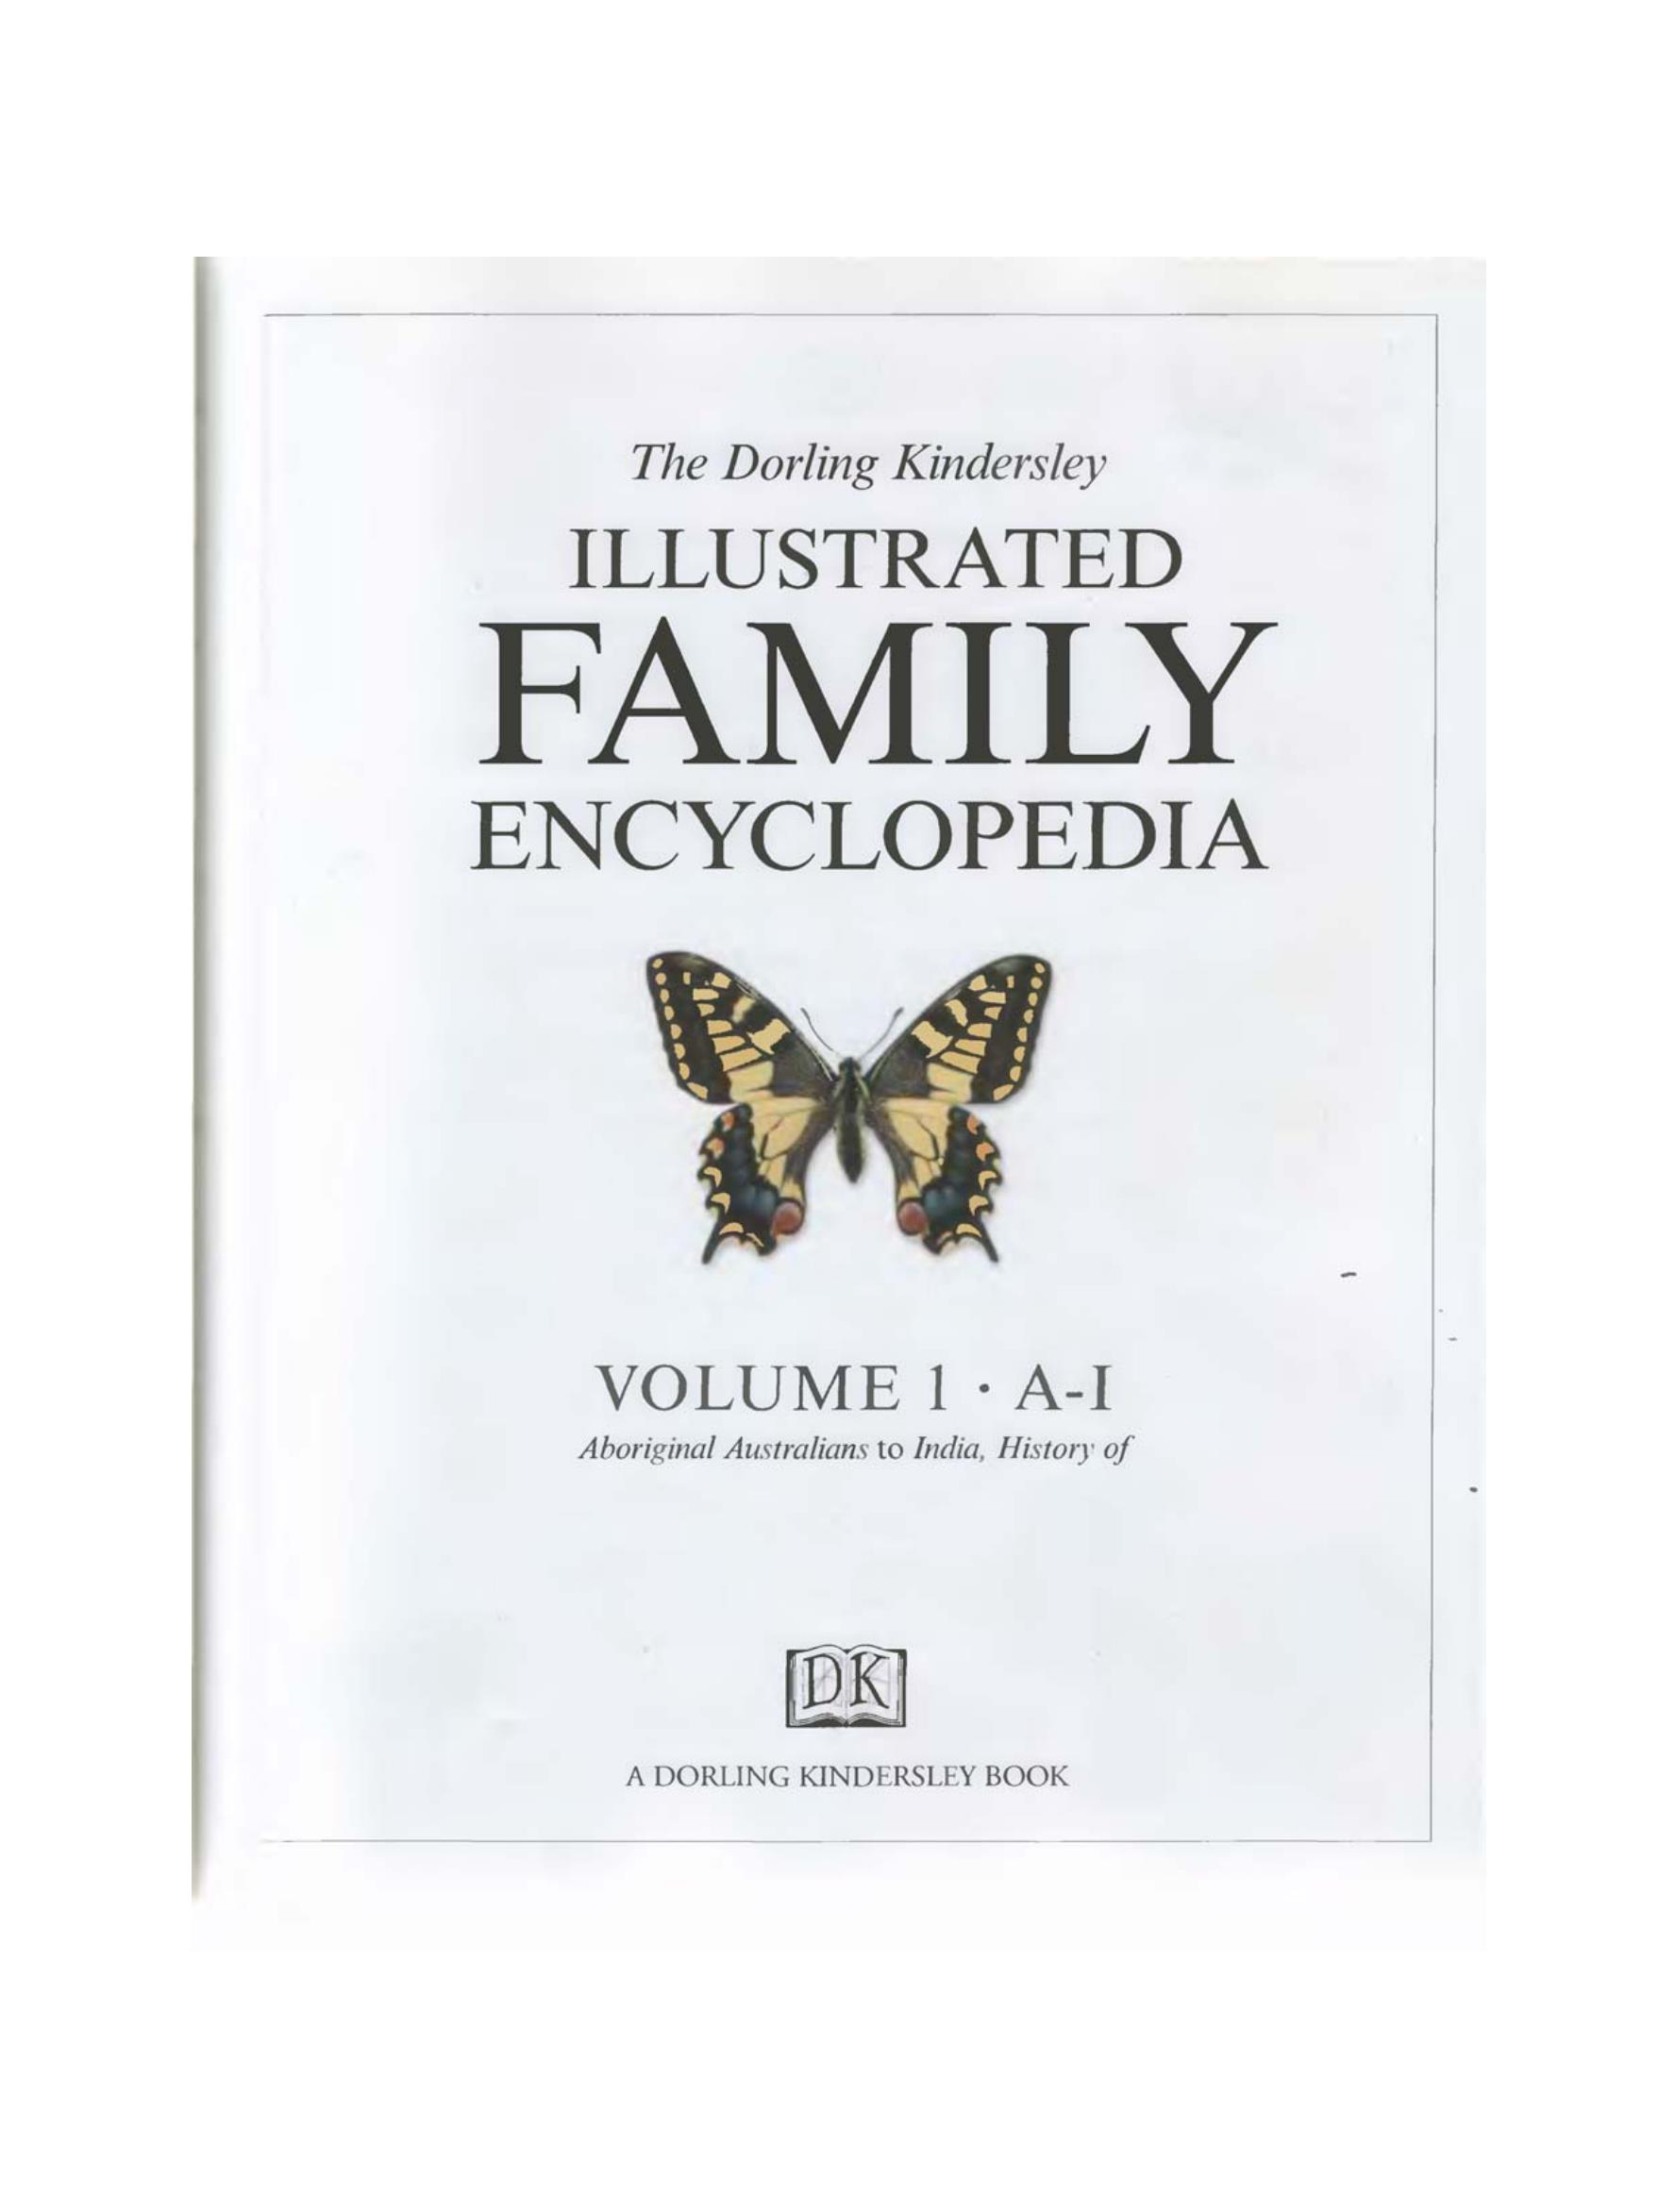 dk illustrated family encyclopedia free download